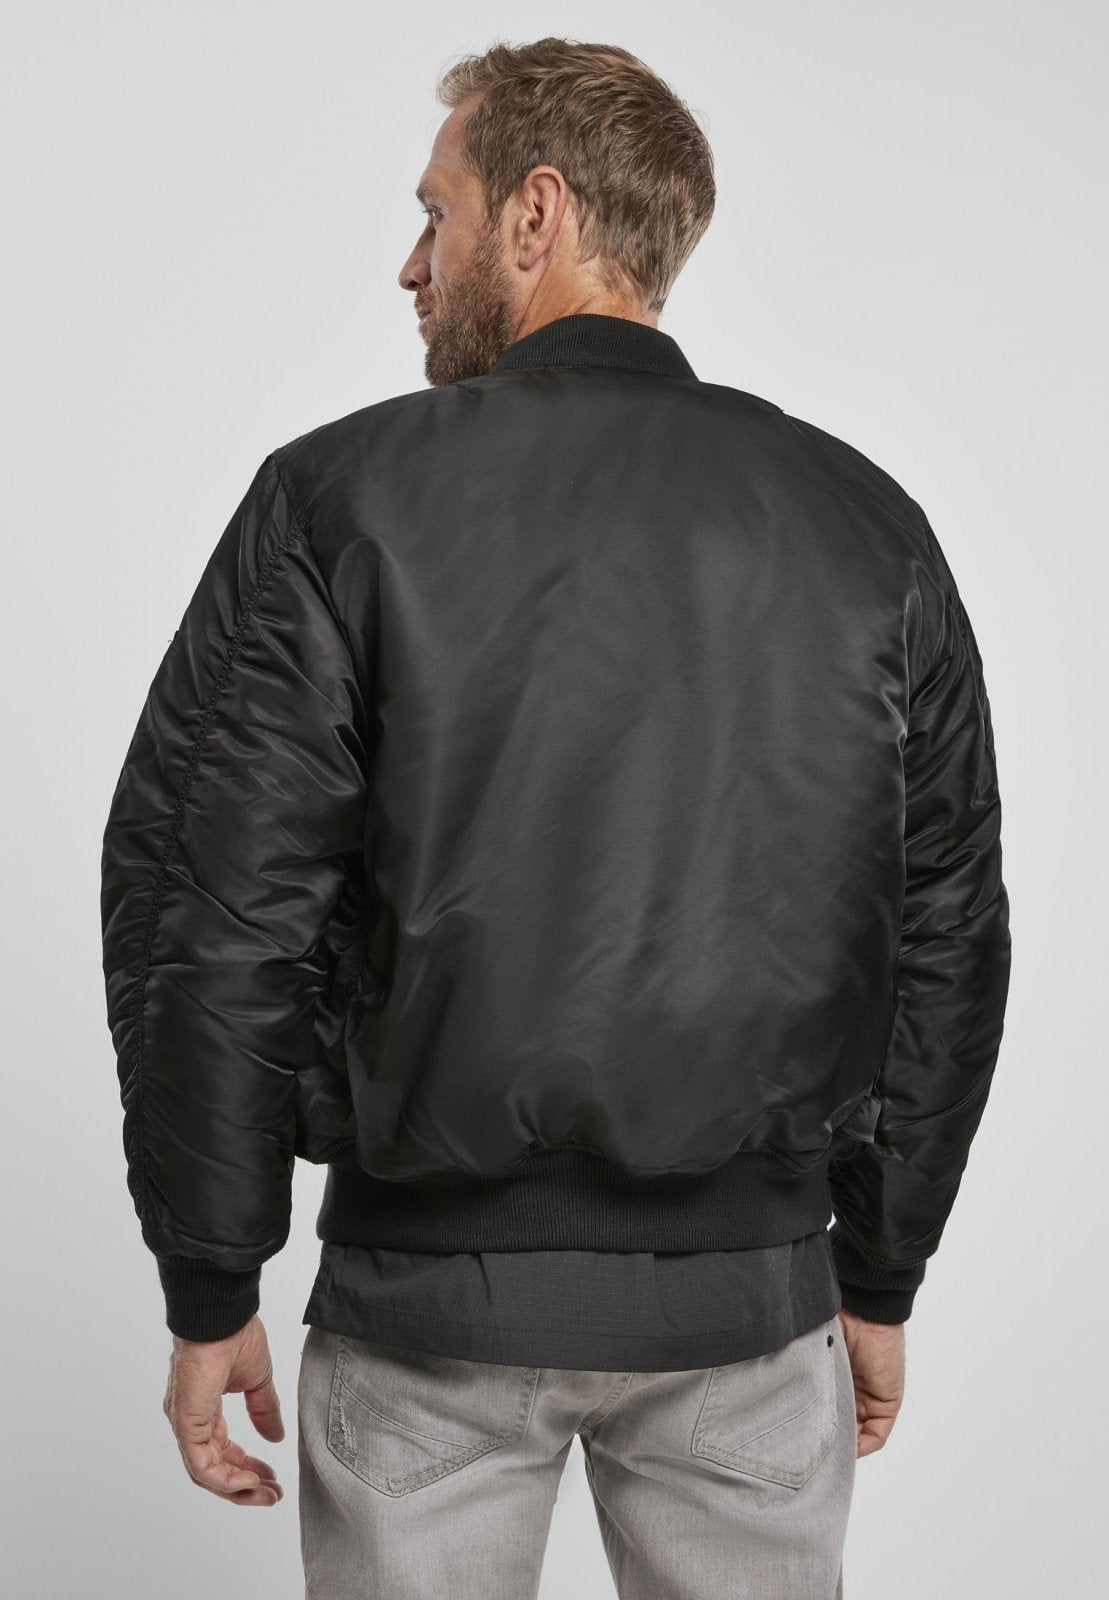 Picture of a Men's MA1 Nylon Bomber Jacket black back view